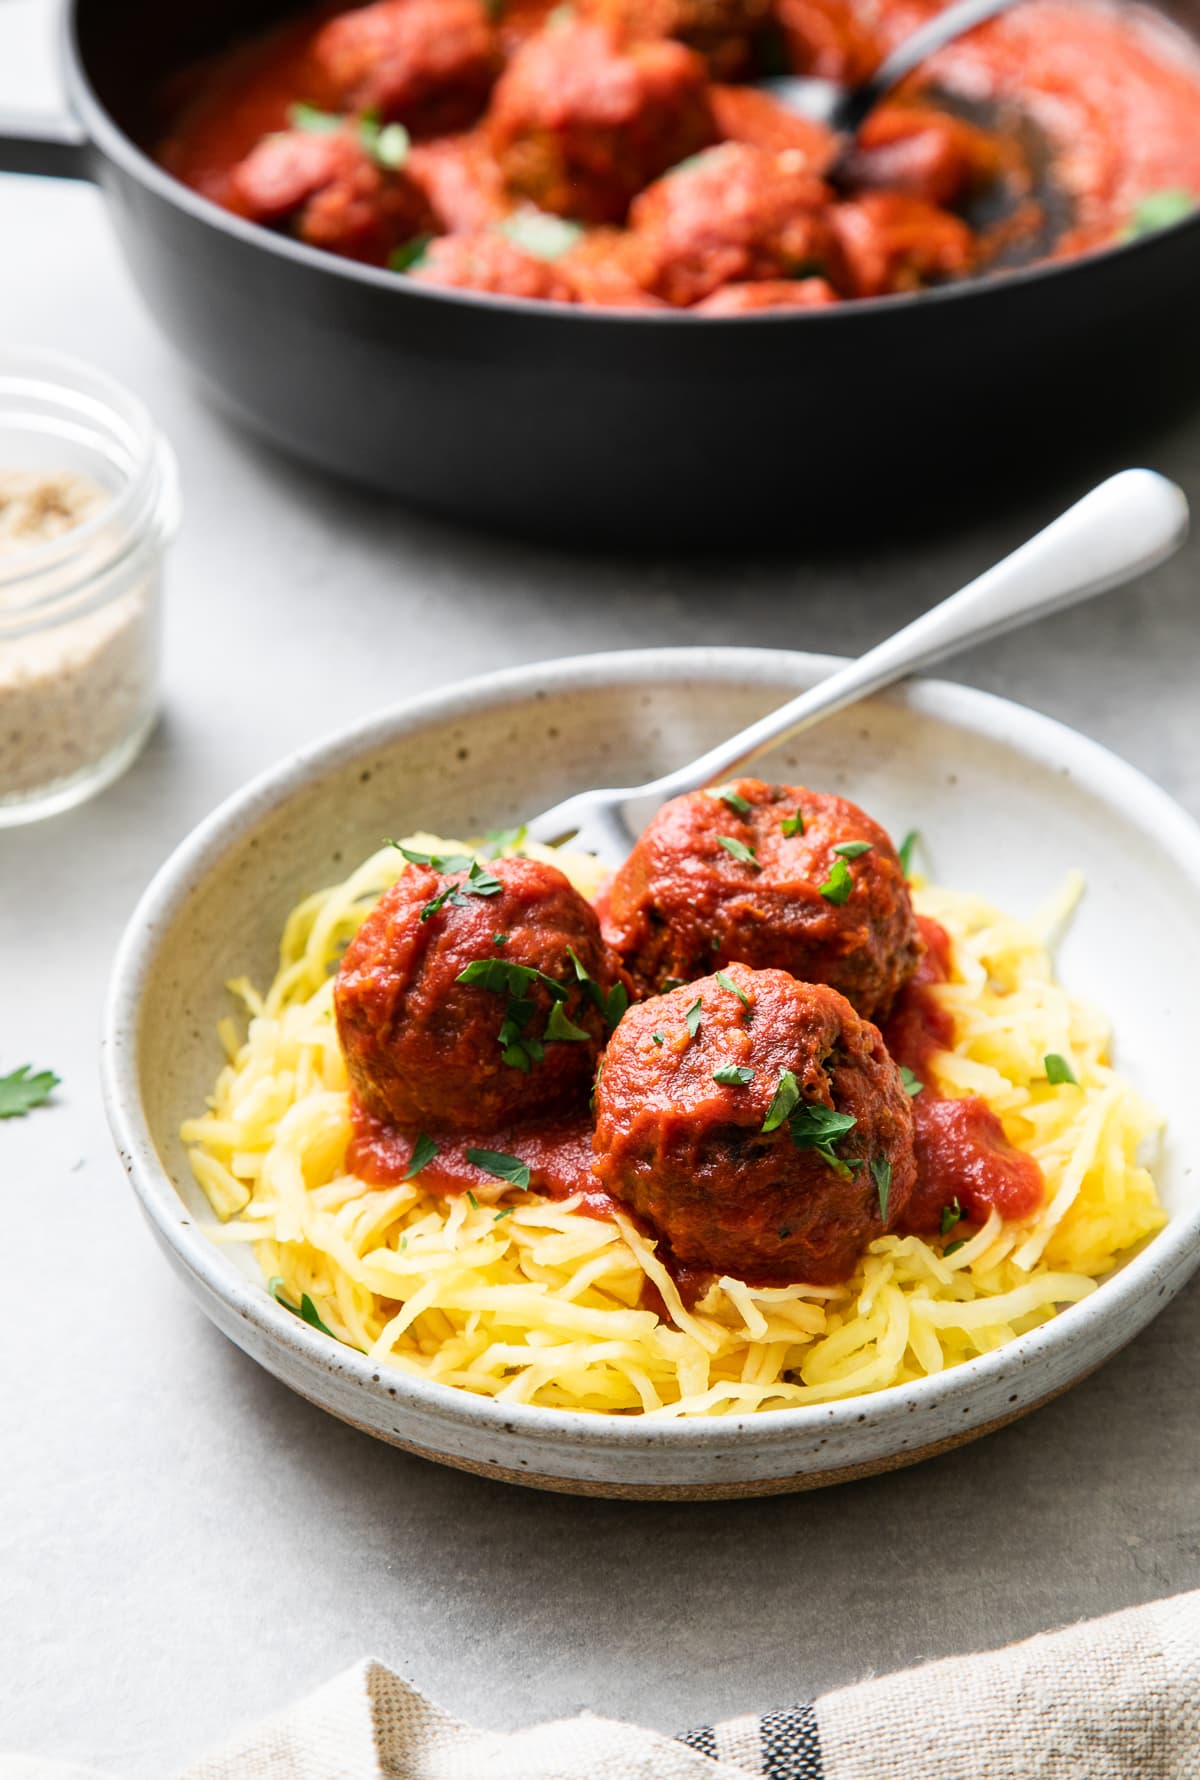 side angle view of a serving of vegan meatballs and marinara sauce overtop spaghetti squash in a bowl with fork.